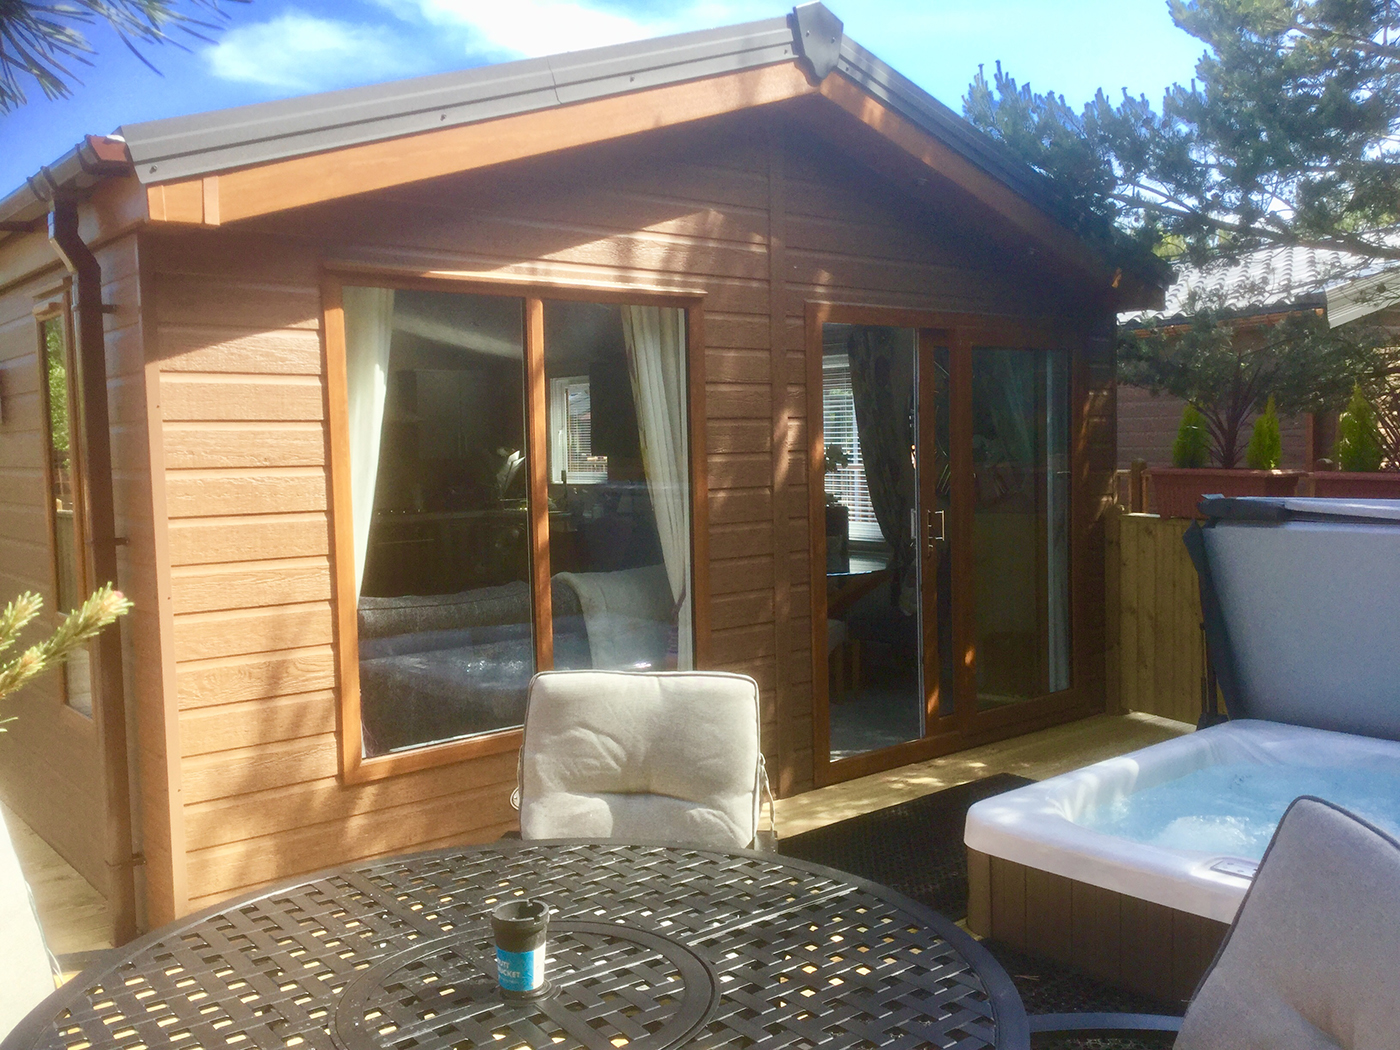 Orchid Lodge Holiday Home in felmoor Park Decking